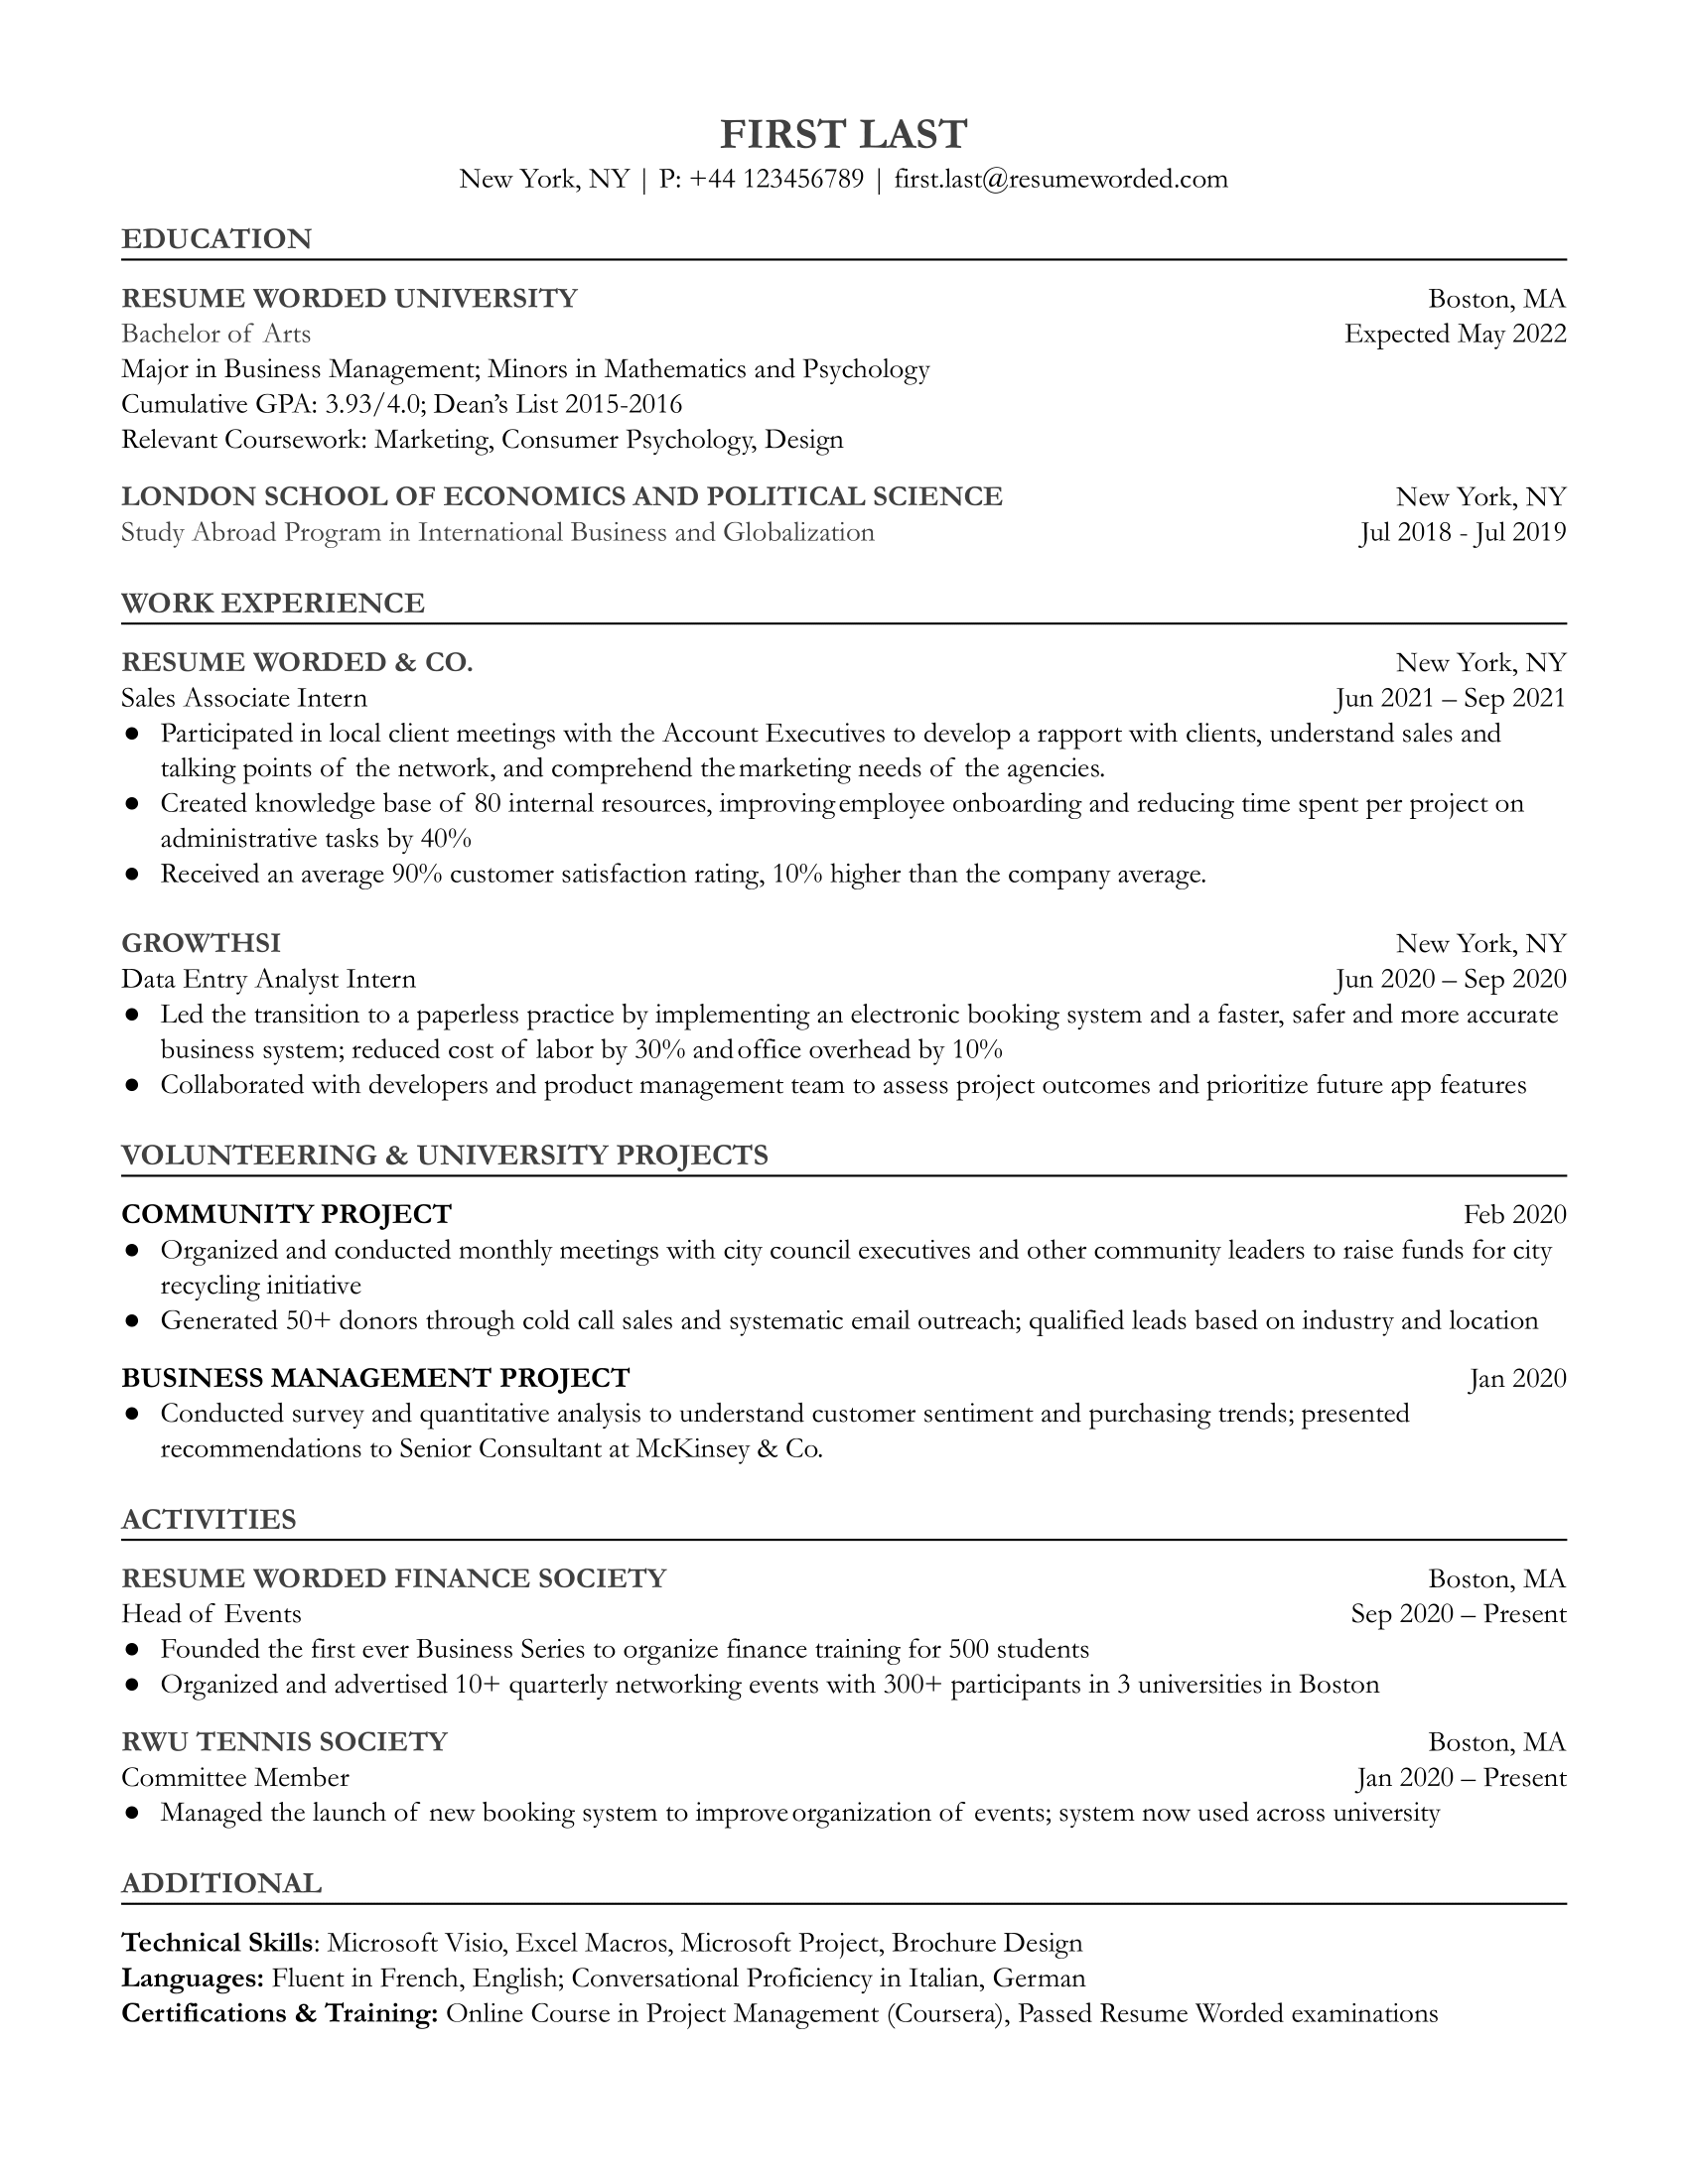 Entry-Level Sales Associate Resume Template + Example